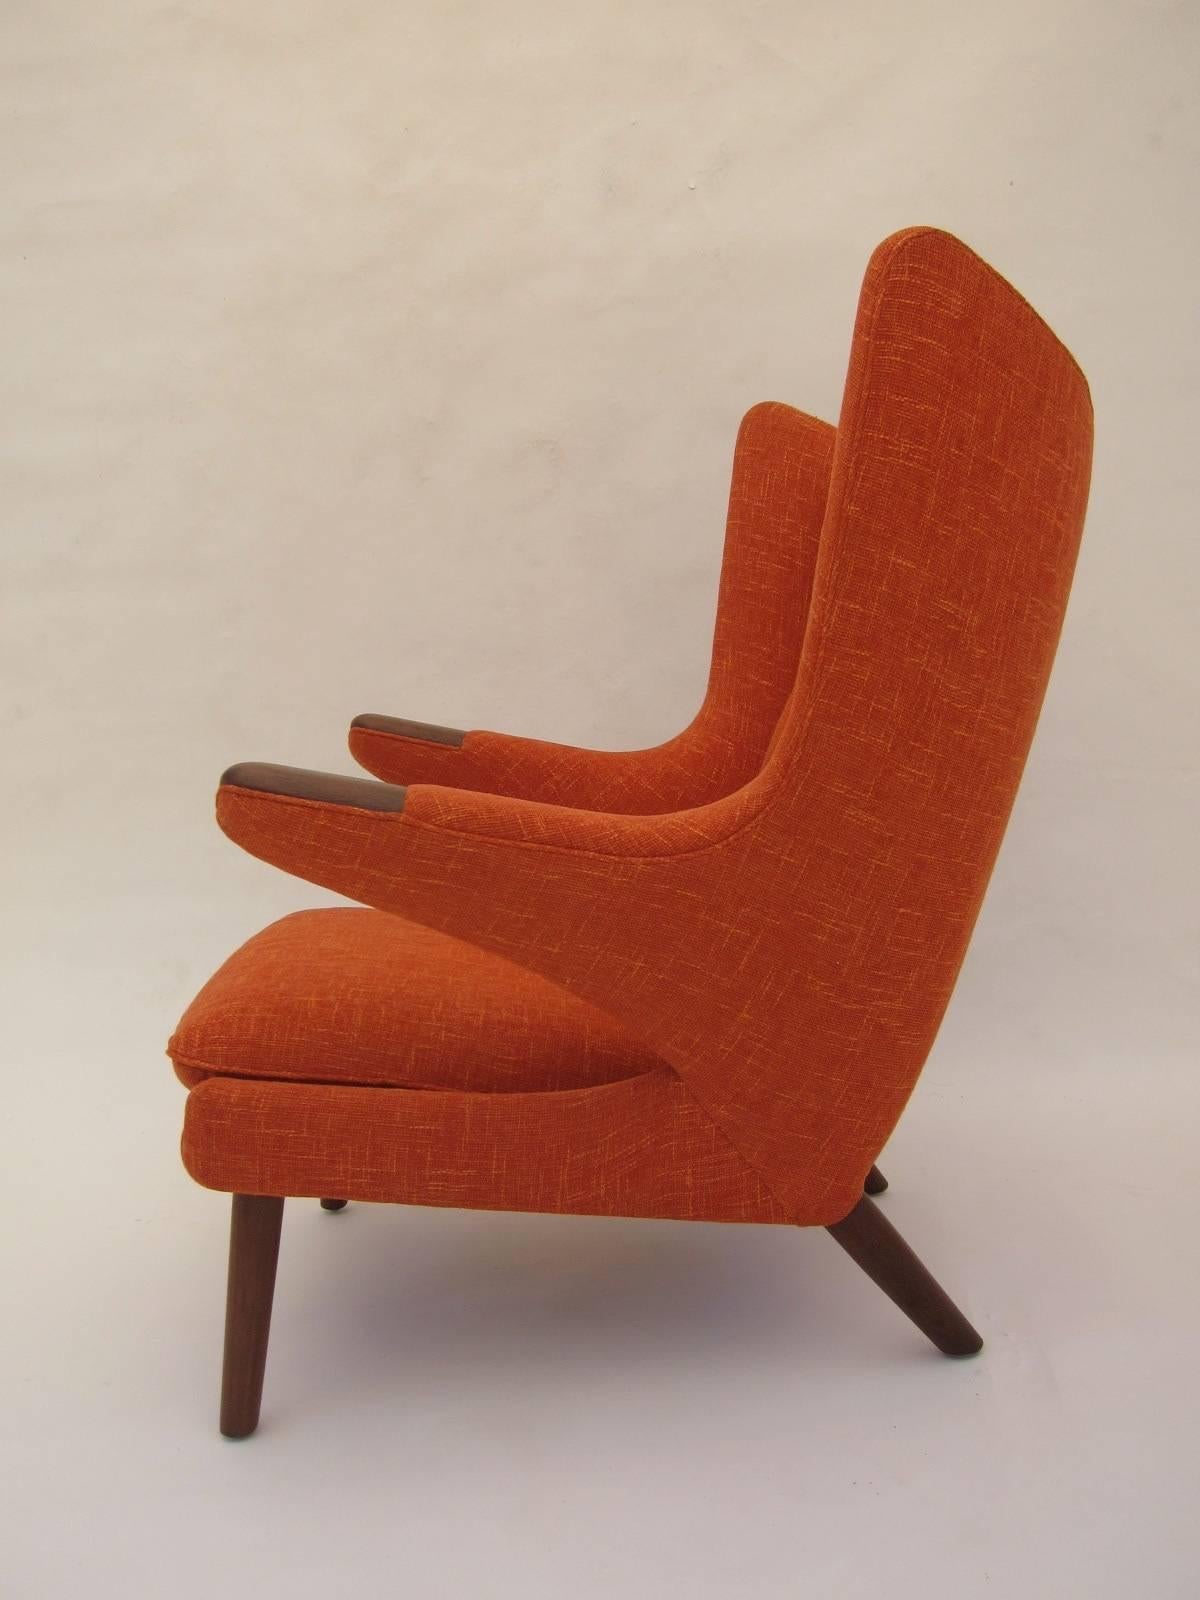 Papa bear chair by Hans J. Wegner. Designed in 1951 and manufactured by A.P. Stolen in Denmark, model AP19. Stamped on bottom as shown in images.

 